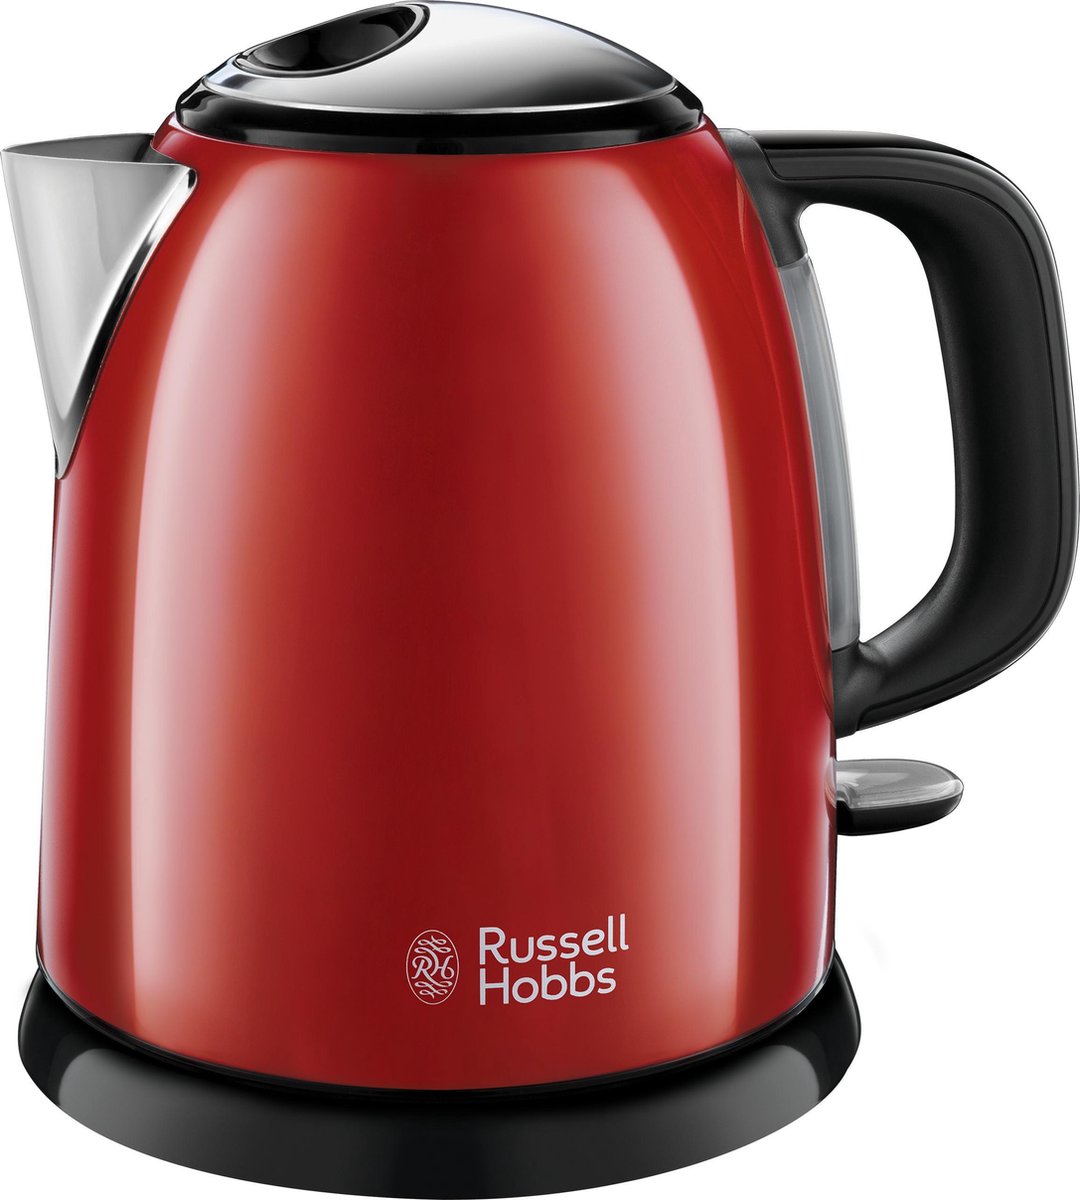 Russell Hobbs 24992-70 Colour Plus